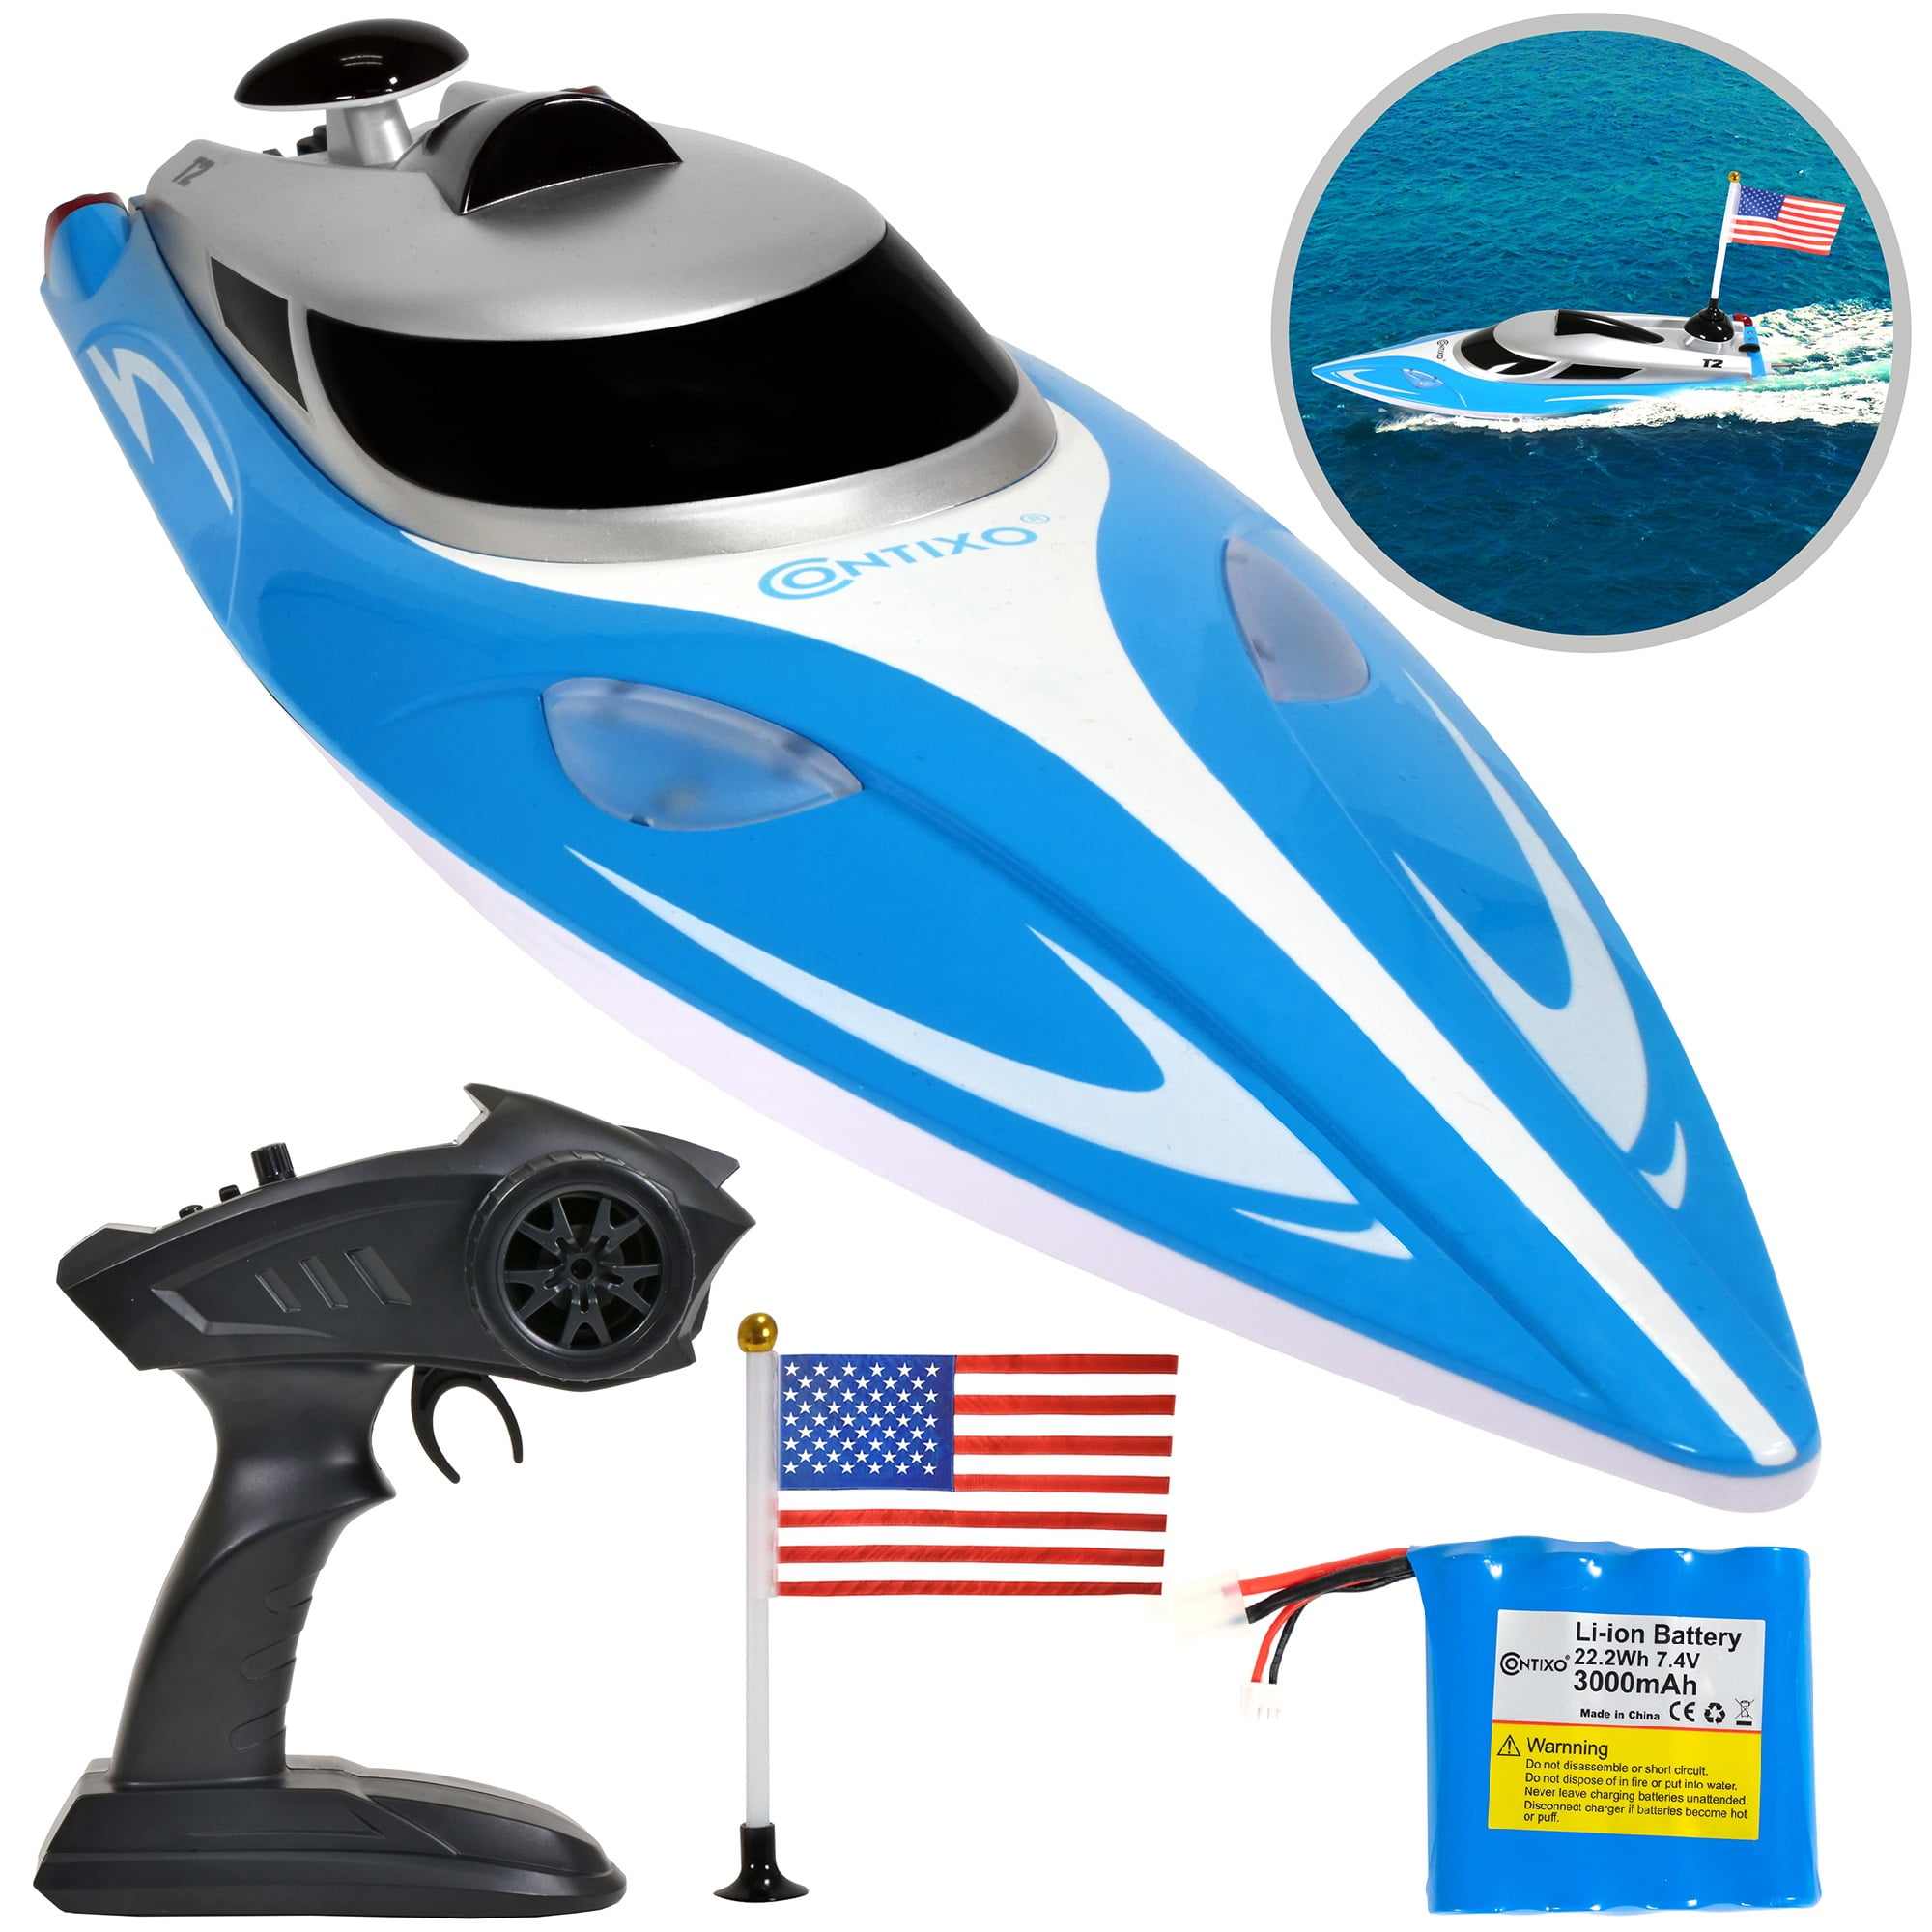 2.4 GHz Remote Control Boat High Speed Rc Boat Racing Boats for Pools and Lakes 